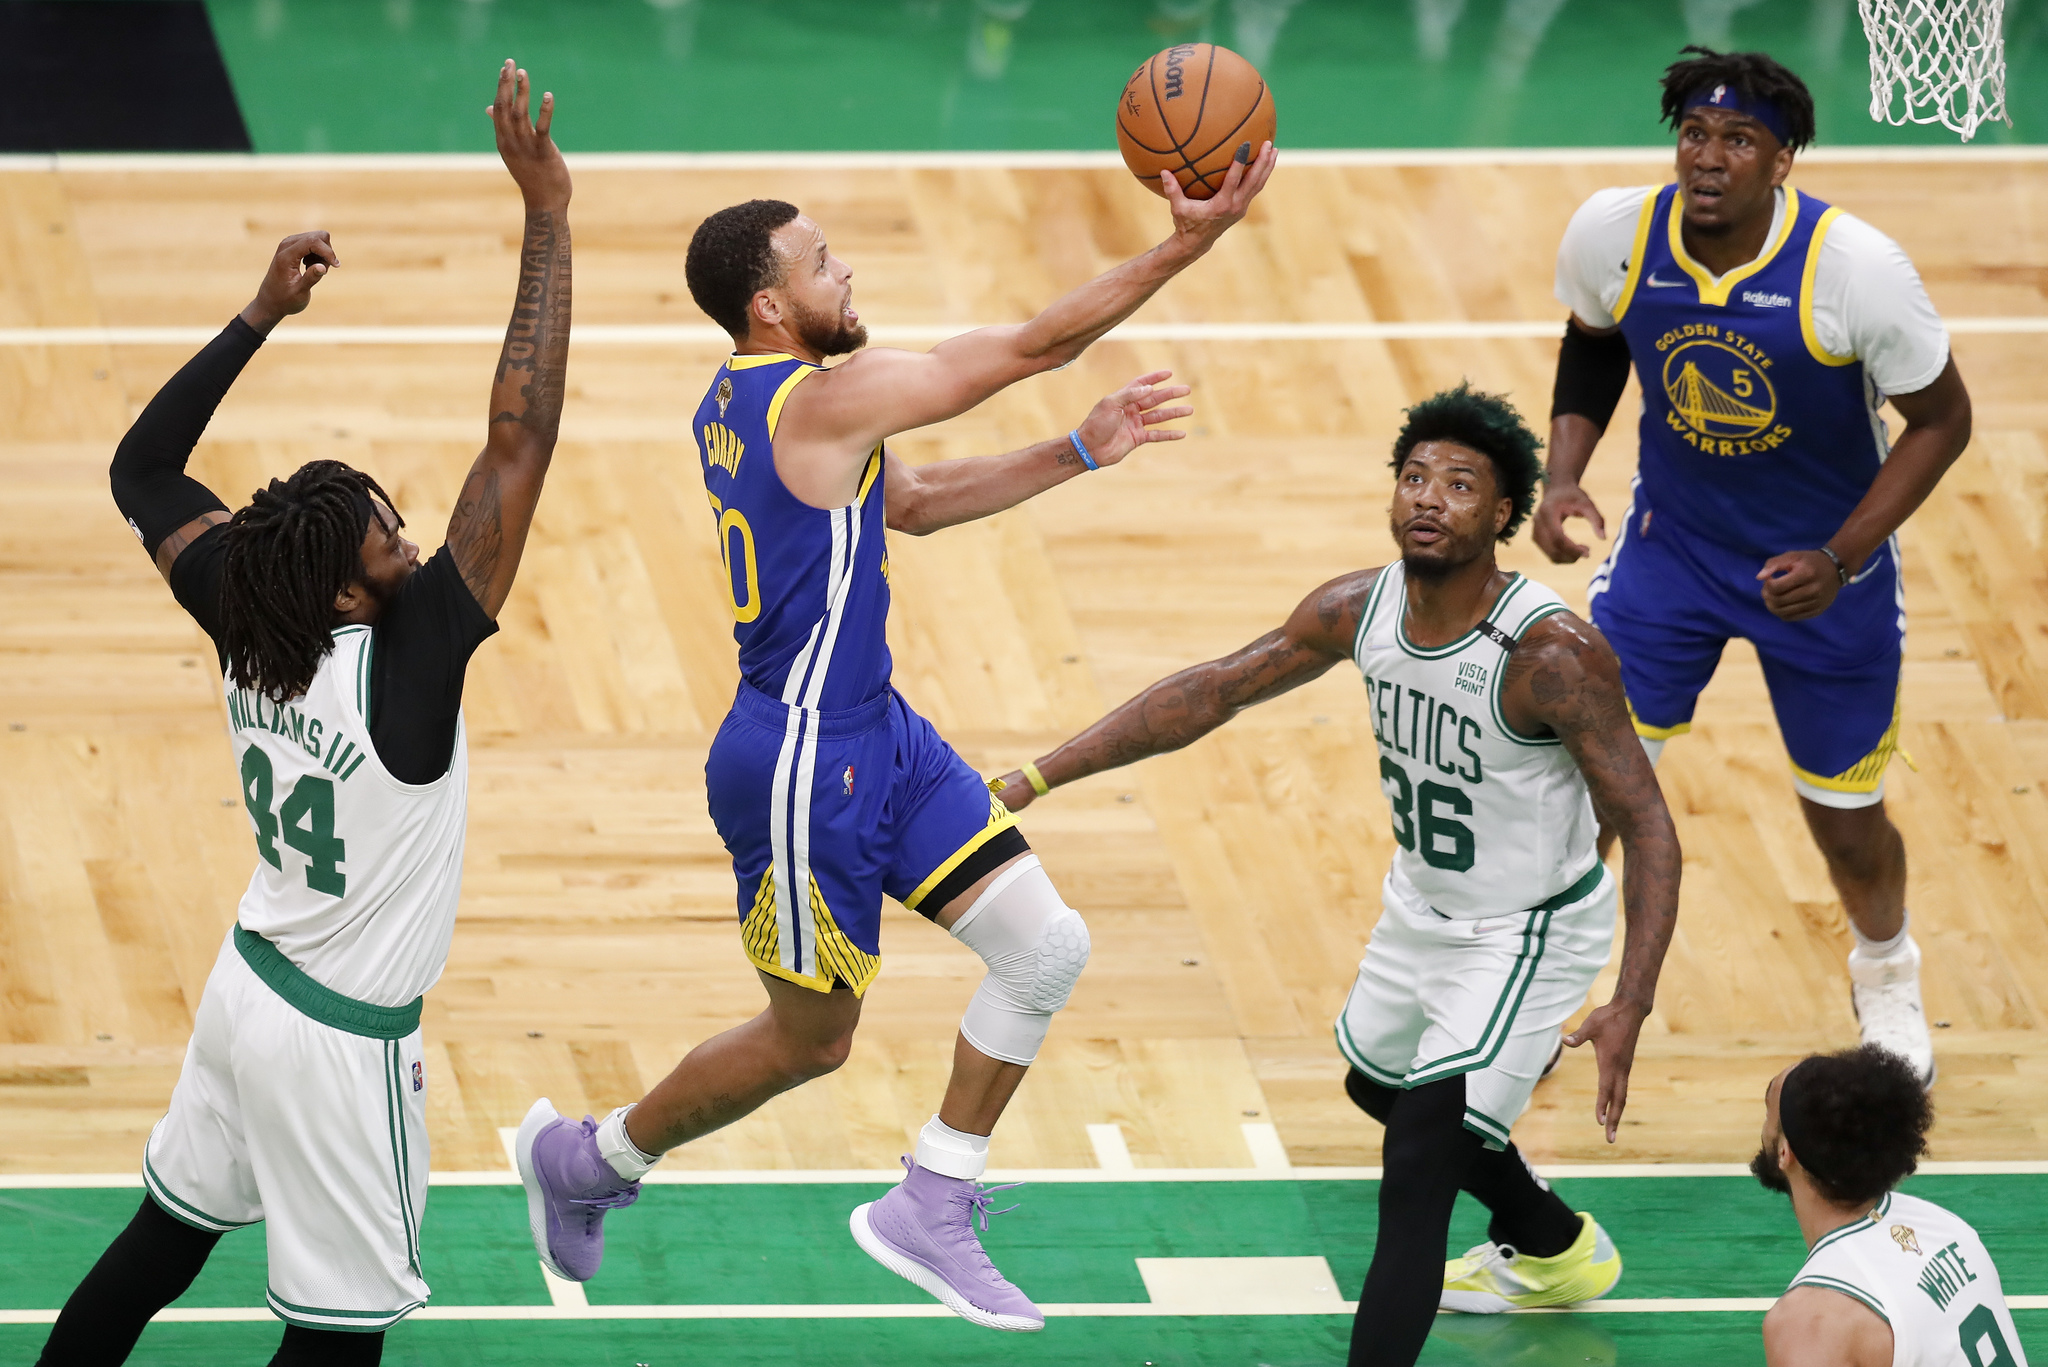 Golden State Warriors guard Stephen Curry (30) goes up for a shot against Boston  lt;HIT gt;Celtics lt;/HIT gt; guard Marcus Smart (36) and center Robert Williams III (44) during the first quarter of Game 6 of basketball's NBA Finals, Thursday, June 16, 2022, in Boston. (AP Photo/Michael Dwyer)